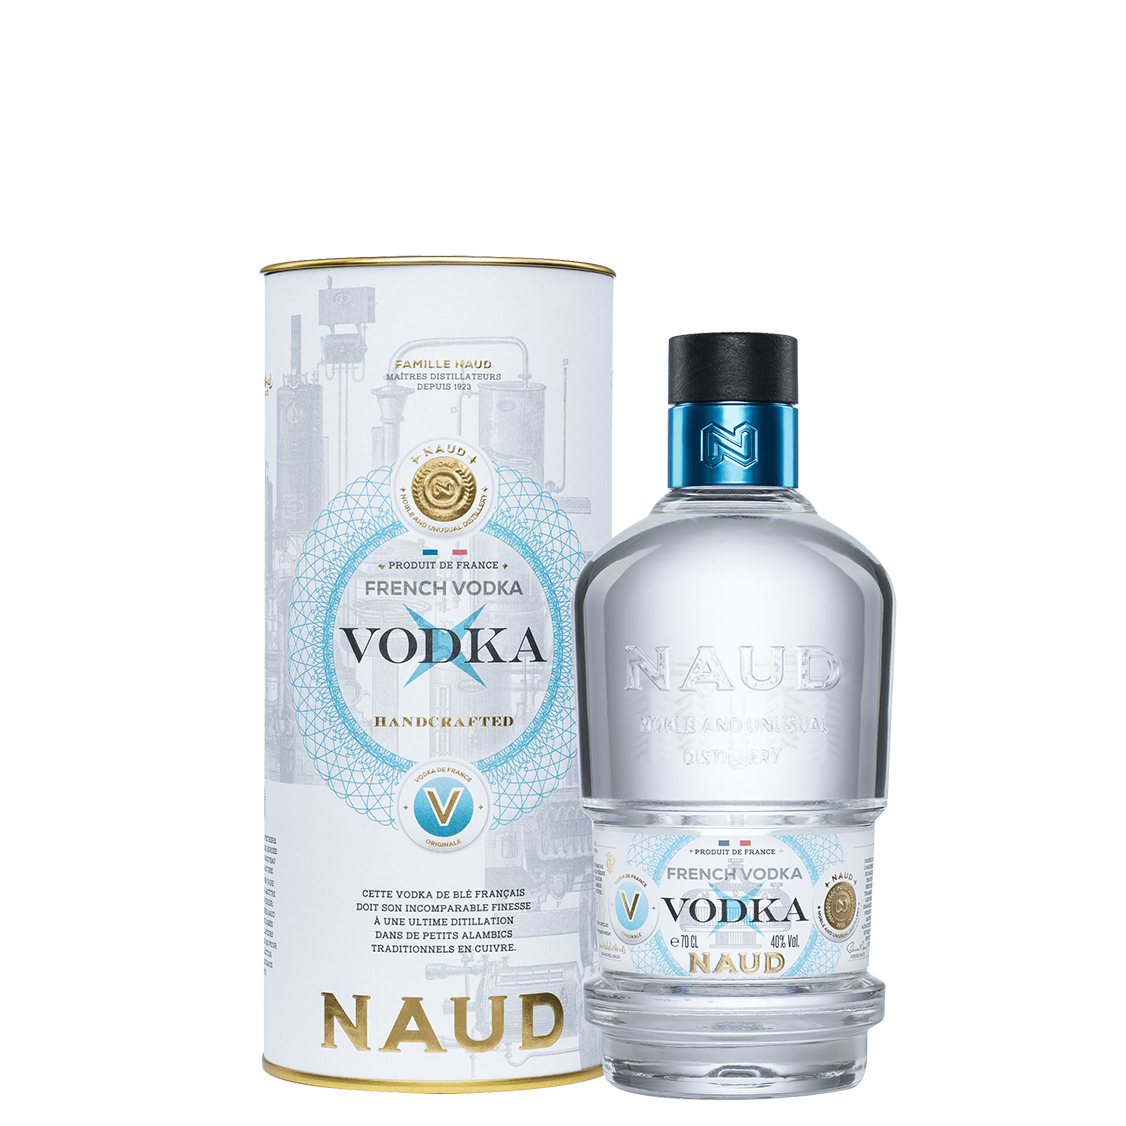 NAUD FRENCH VODKA PACKAGING